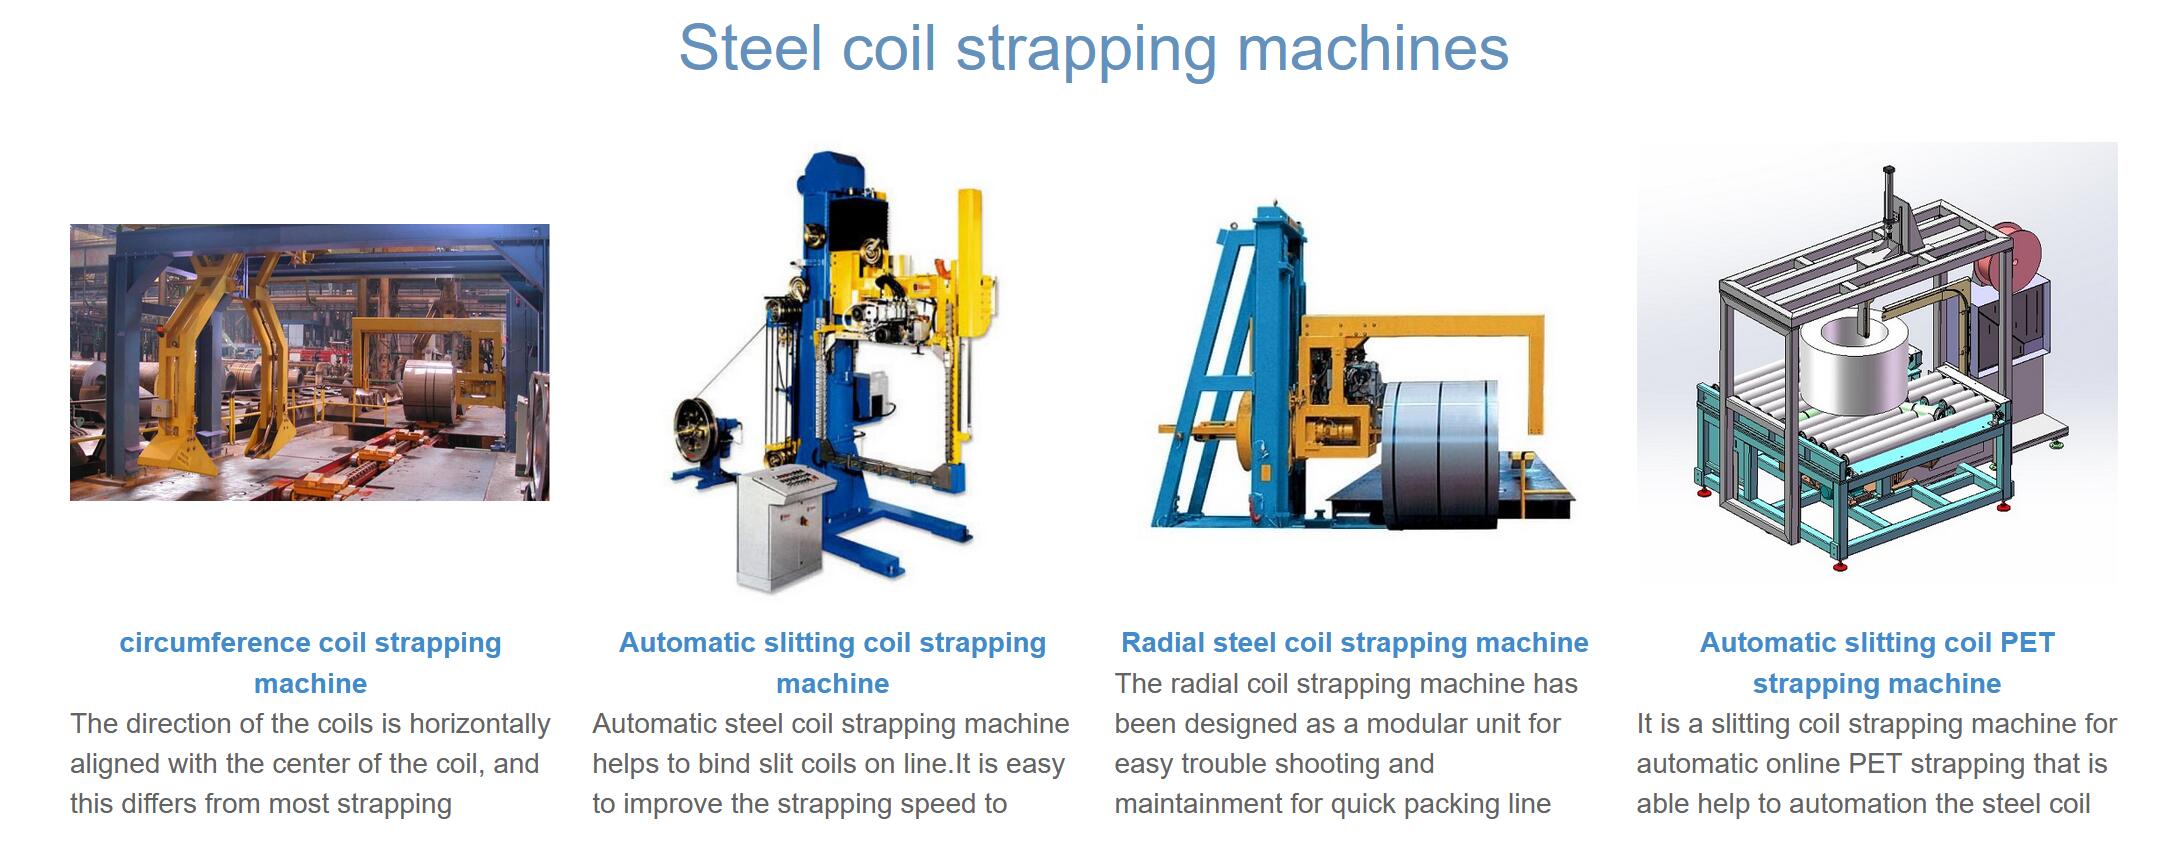 steel coil strapping machines